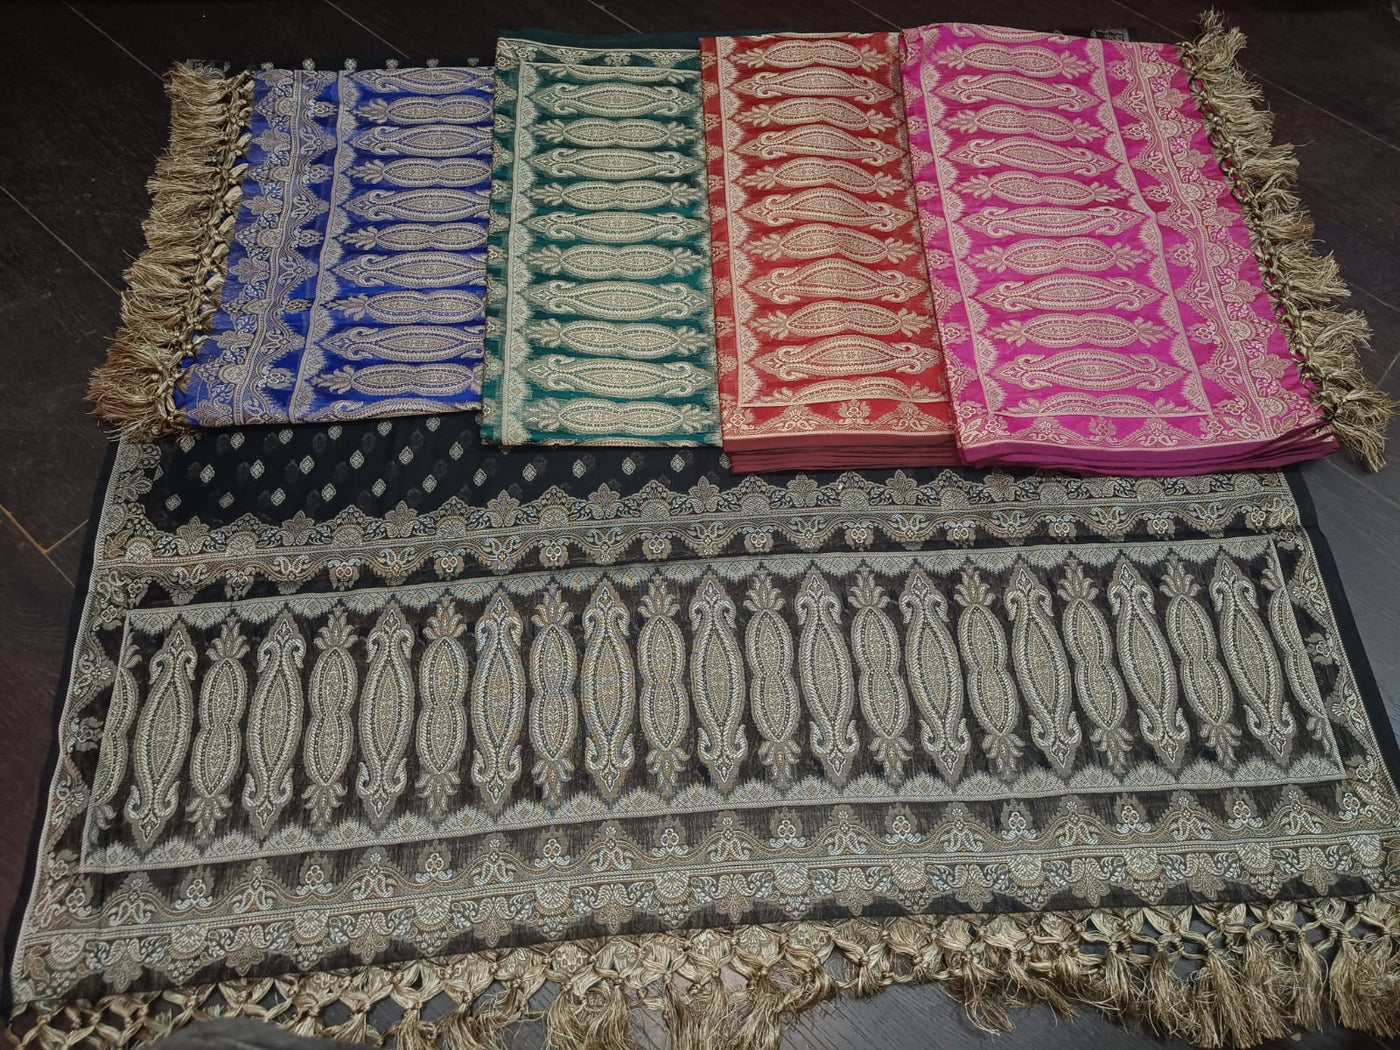 BROCADE shawl / wrap/stole/dupatta/scarf/sarong [please mention color of choice]